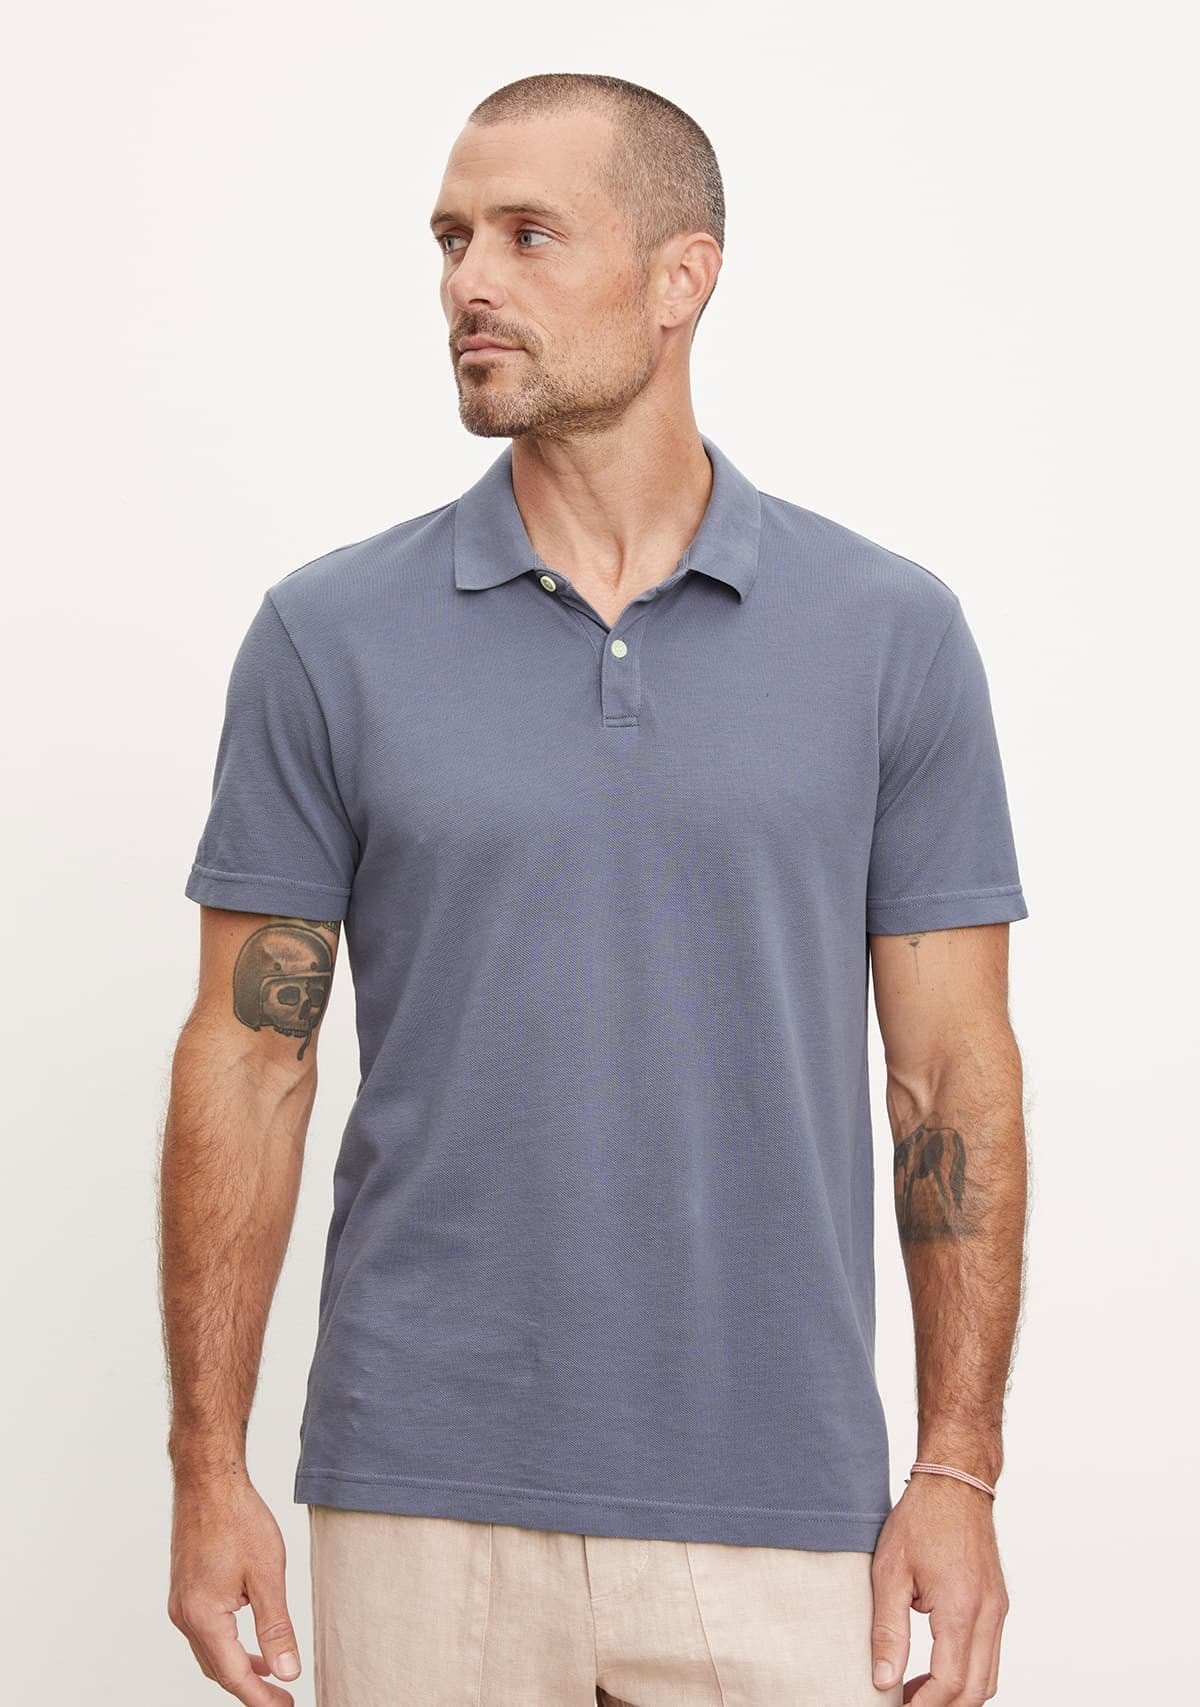 Model wearing the Willis Polo